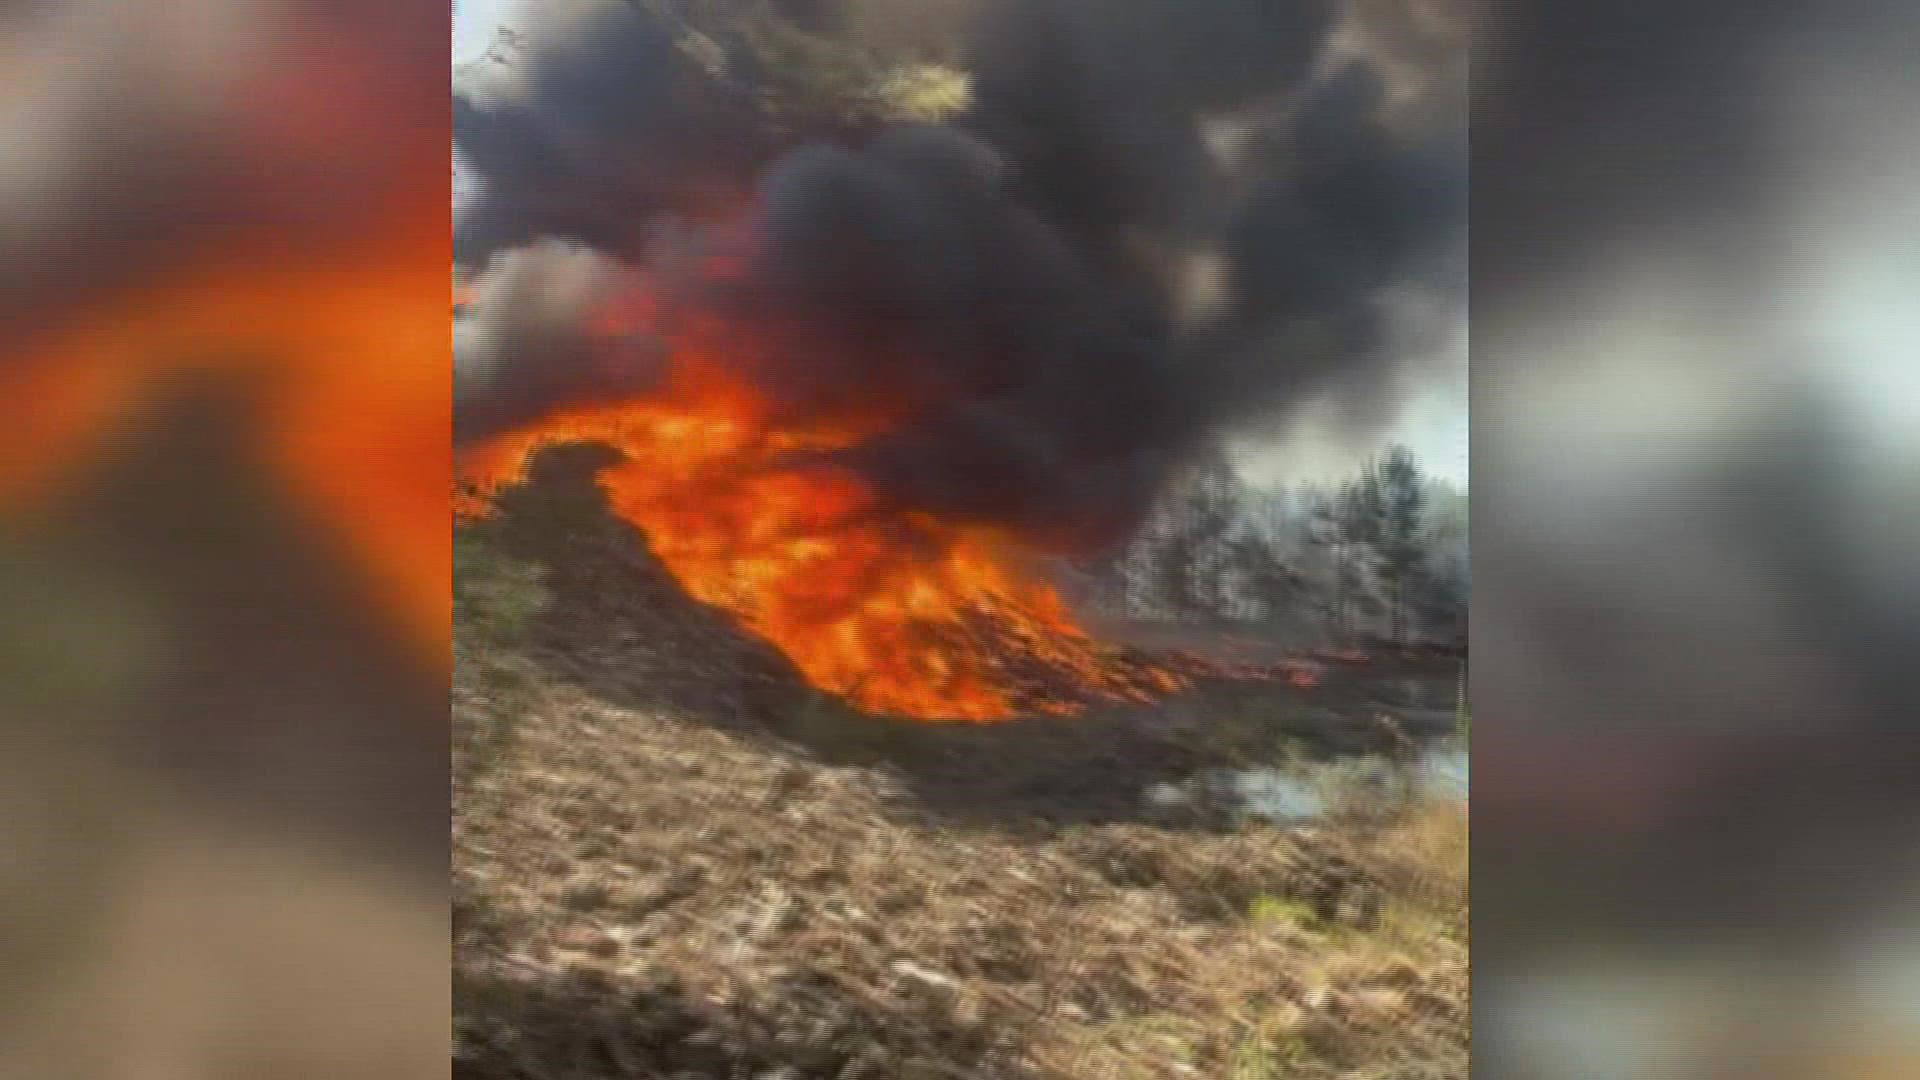 Officials believe a large pile of trash was burning out the facility when it got out of hand.